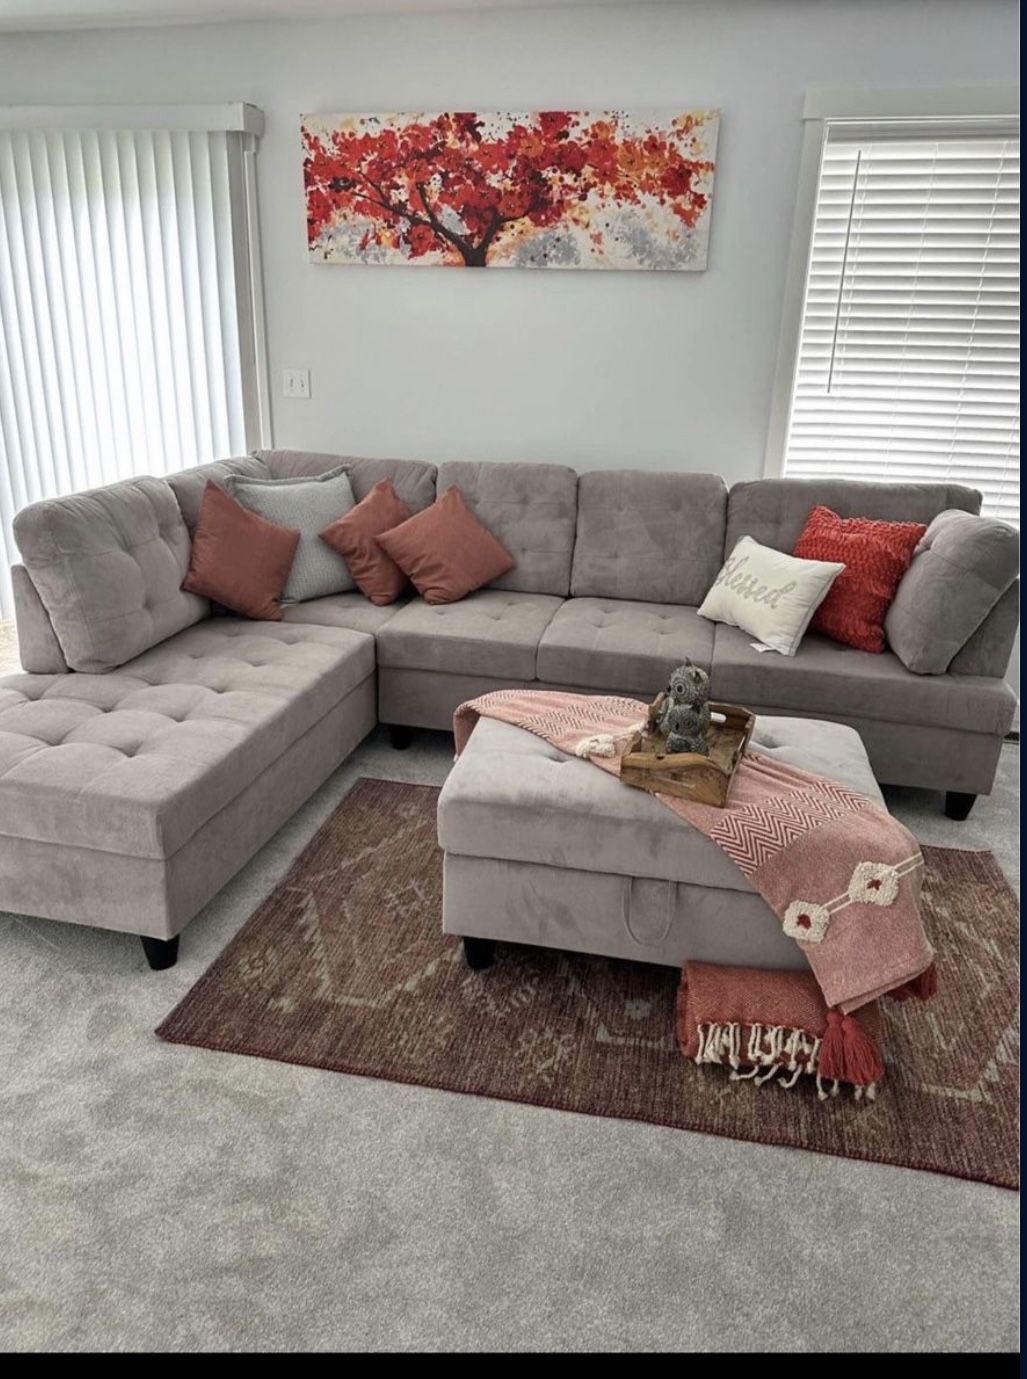  Rand New COSTCO Grey Chenille Sectional Couch And Ottoman 